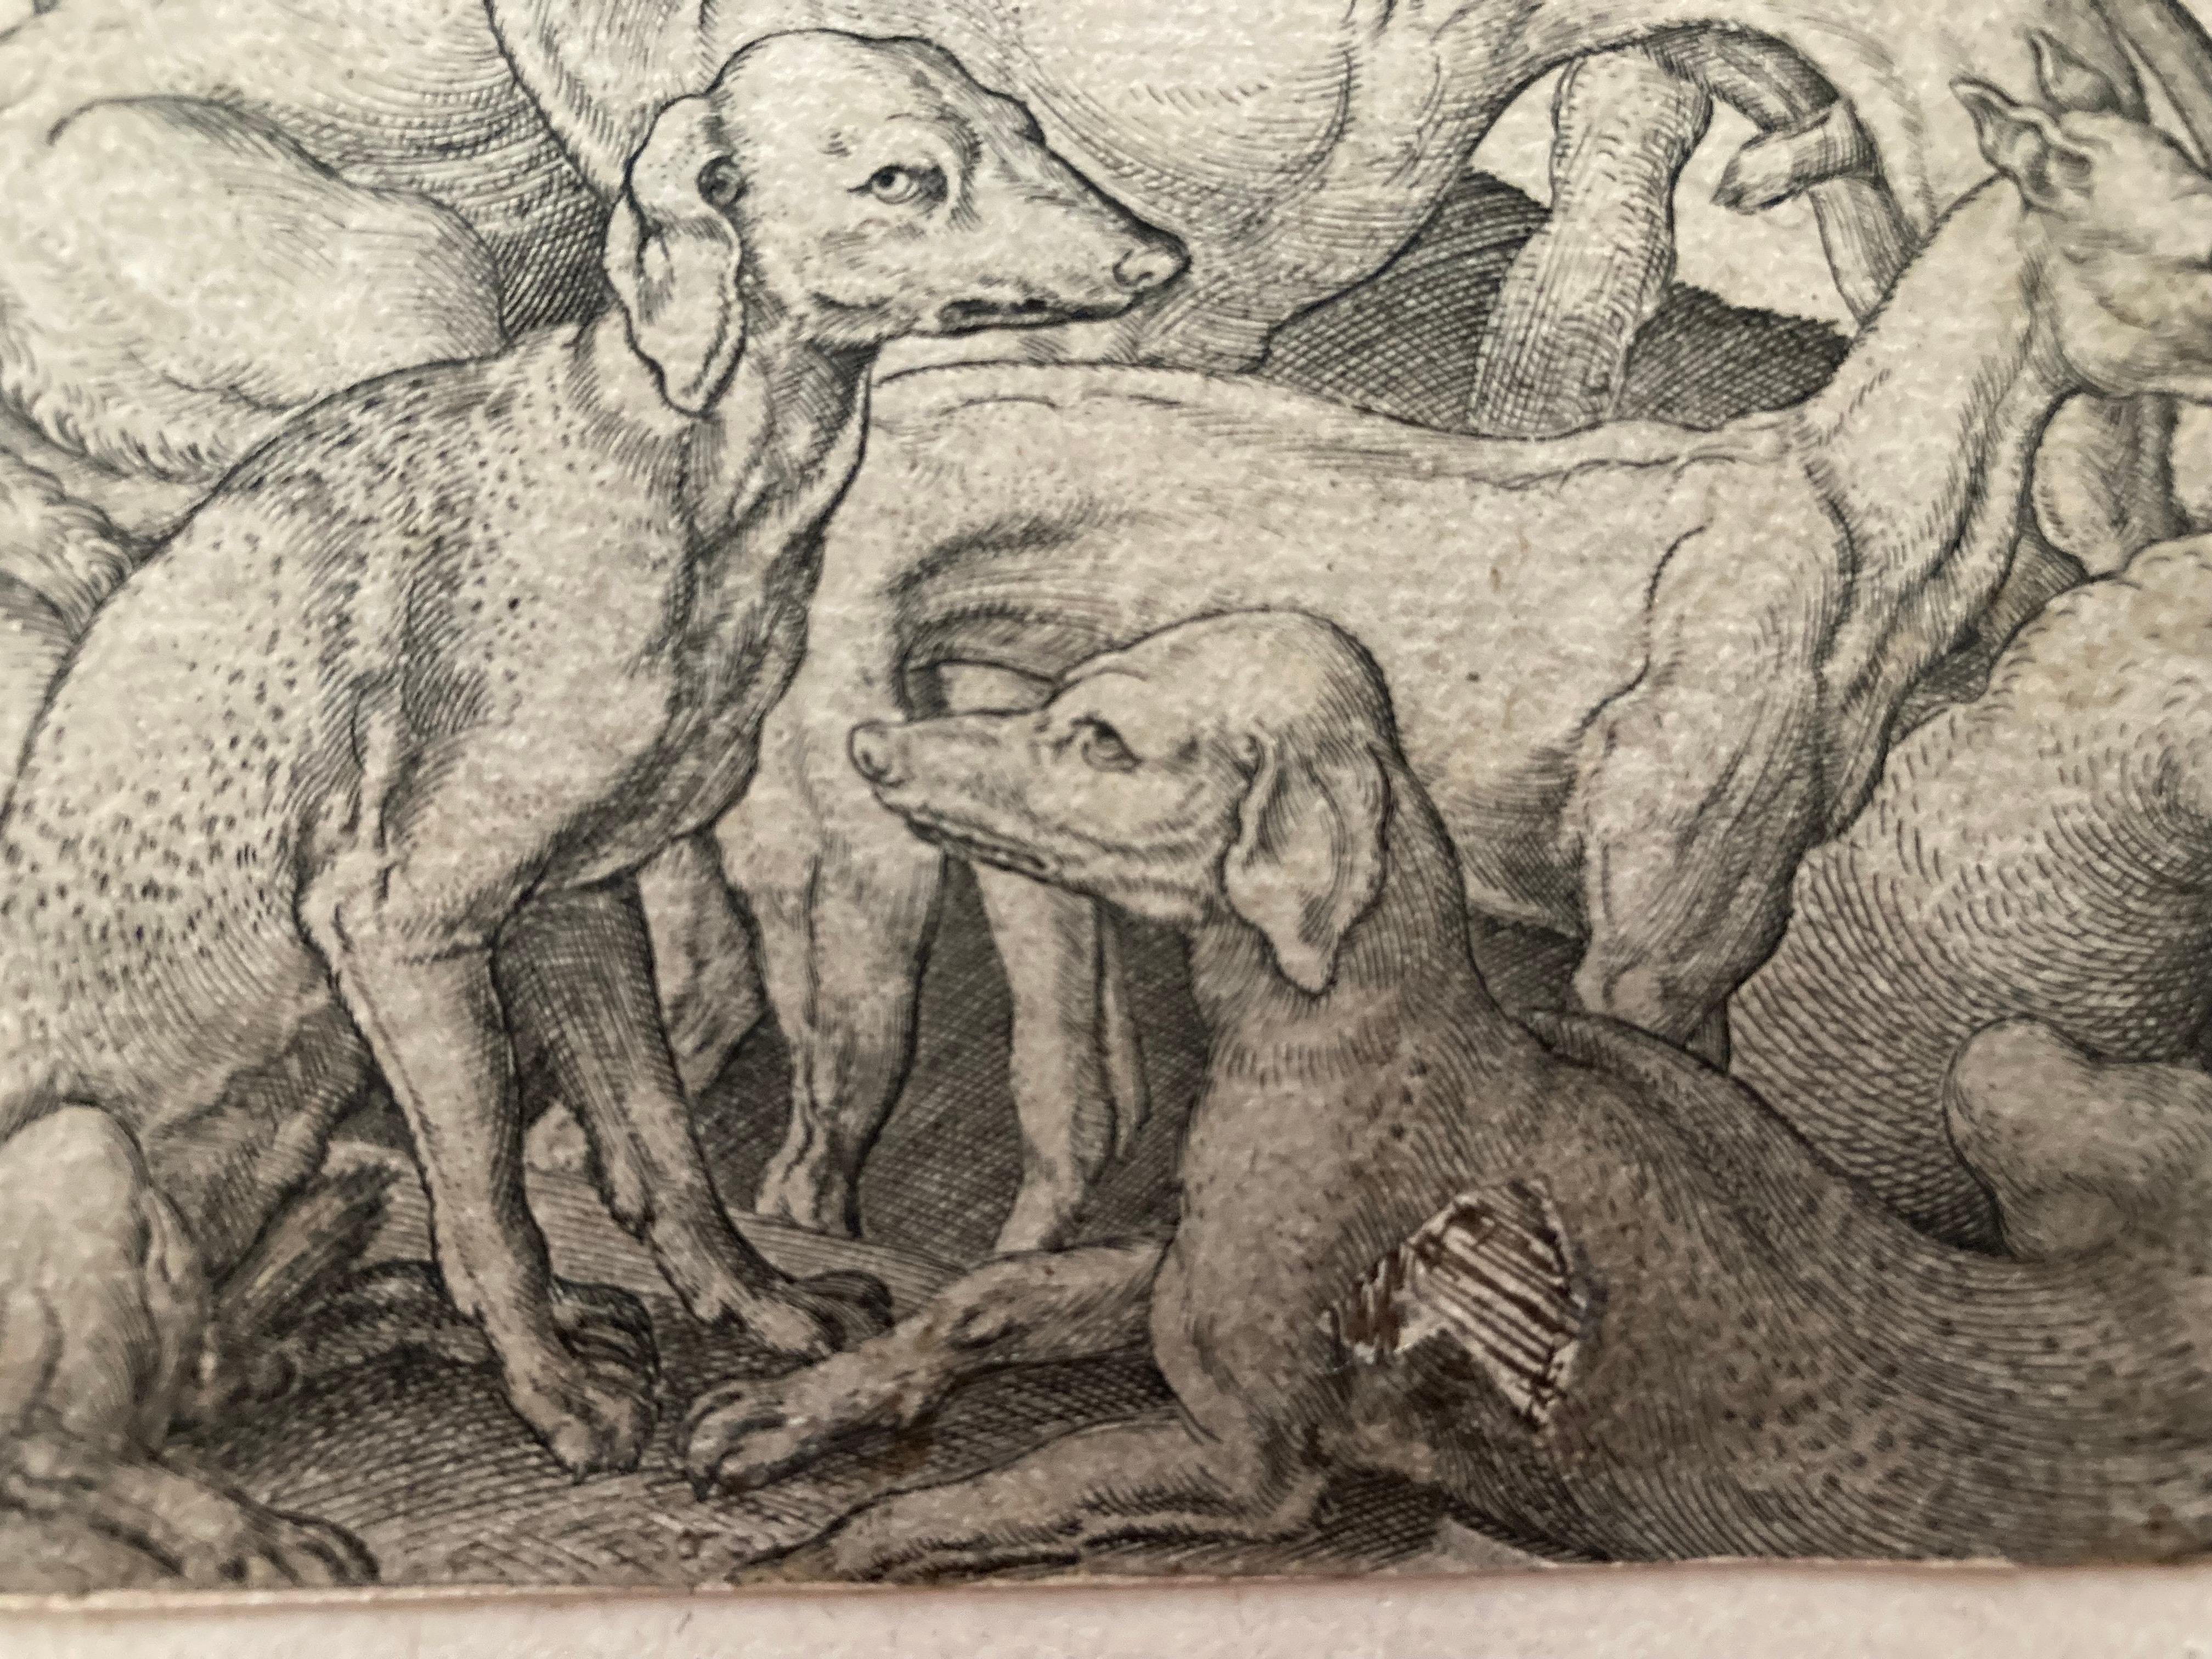 Engraving by the artist Virgil Solis, Six dogs; standing, reclining and seated among trees.
Engraving, made by Virgil Solis. 
German, c. 1530-1562. 
Signed with monogram 'VS' intertwined at lower left.
Bibliographic references and Literature, see: